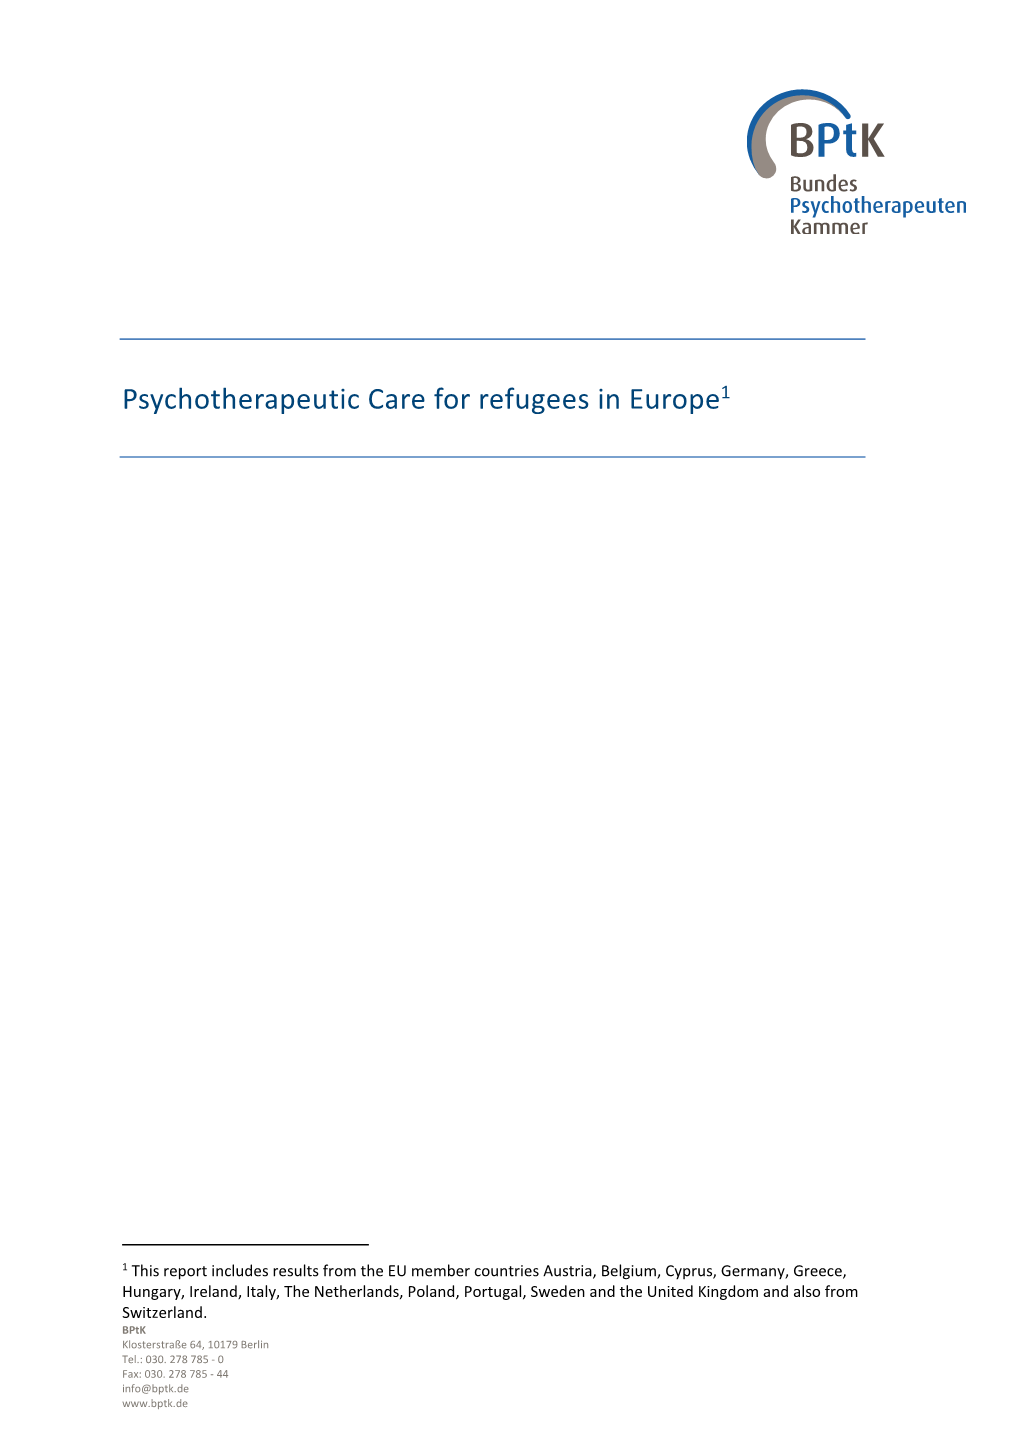 1 This Report Includes Results from the EU Member Countries Austria, Belgium, Cyprus, Germany, Greece, Hungary, Ireland, Italy